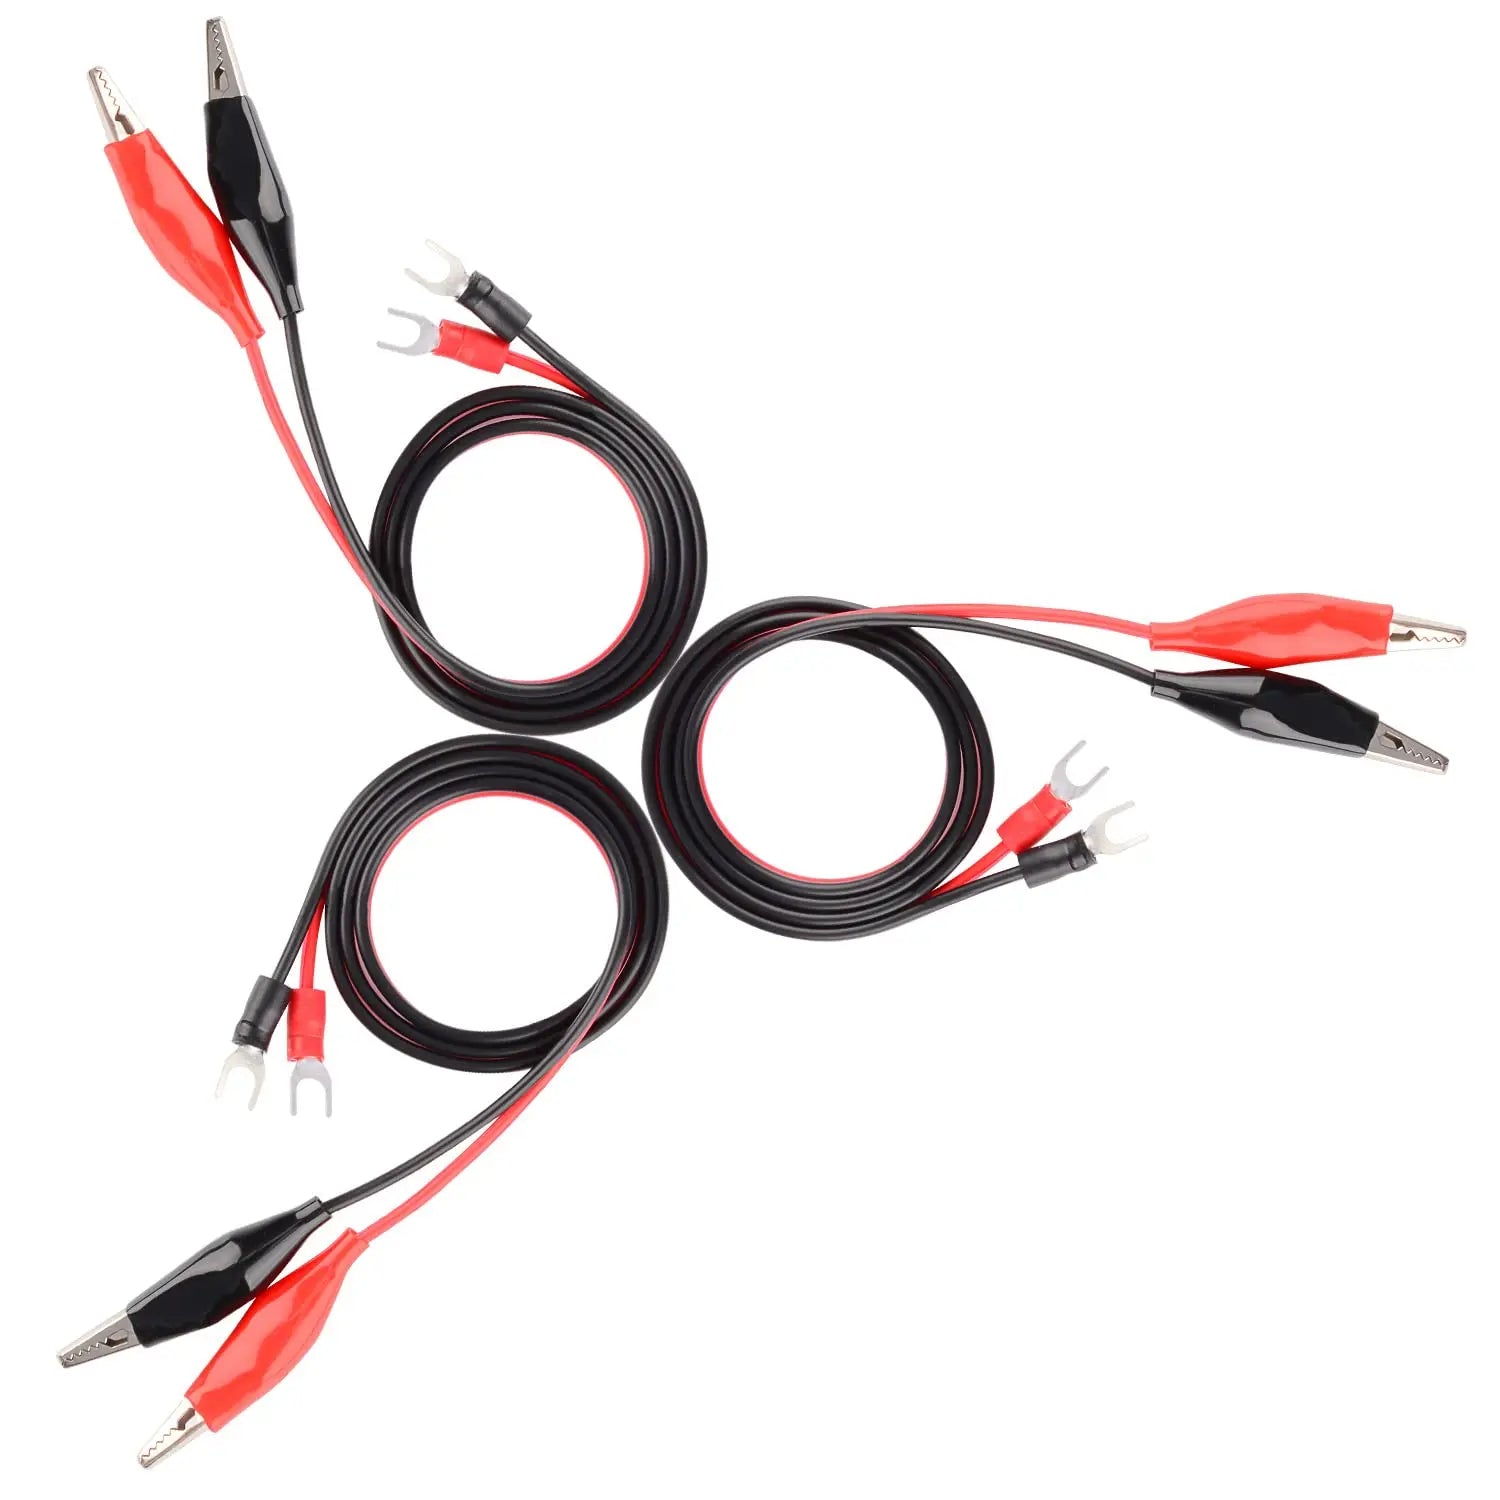 Test Leads with Screw Off Alligator Clips